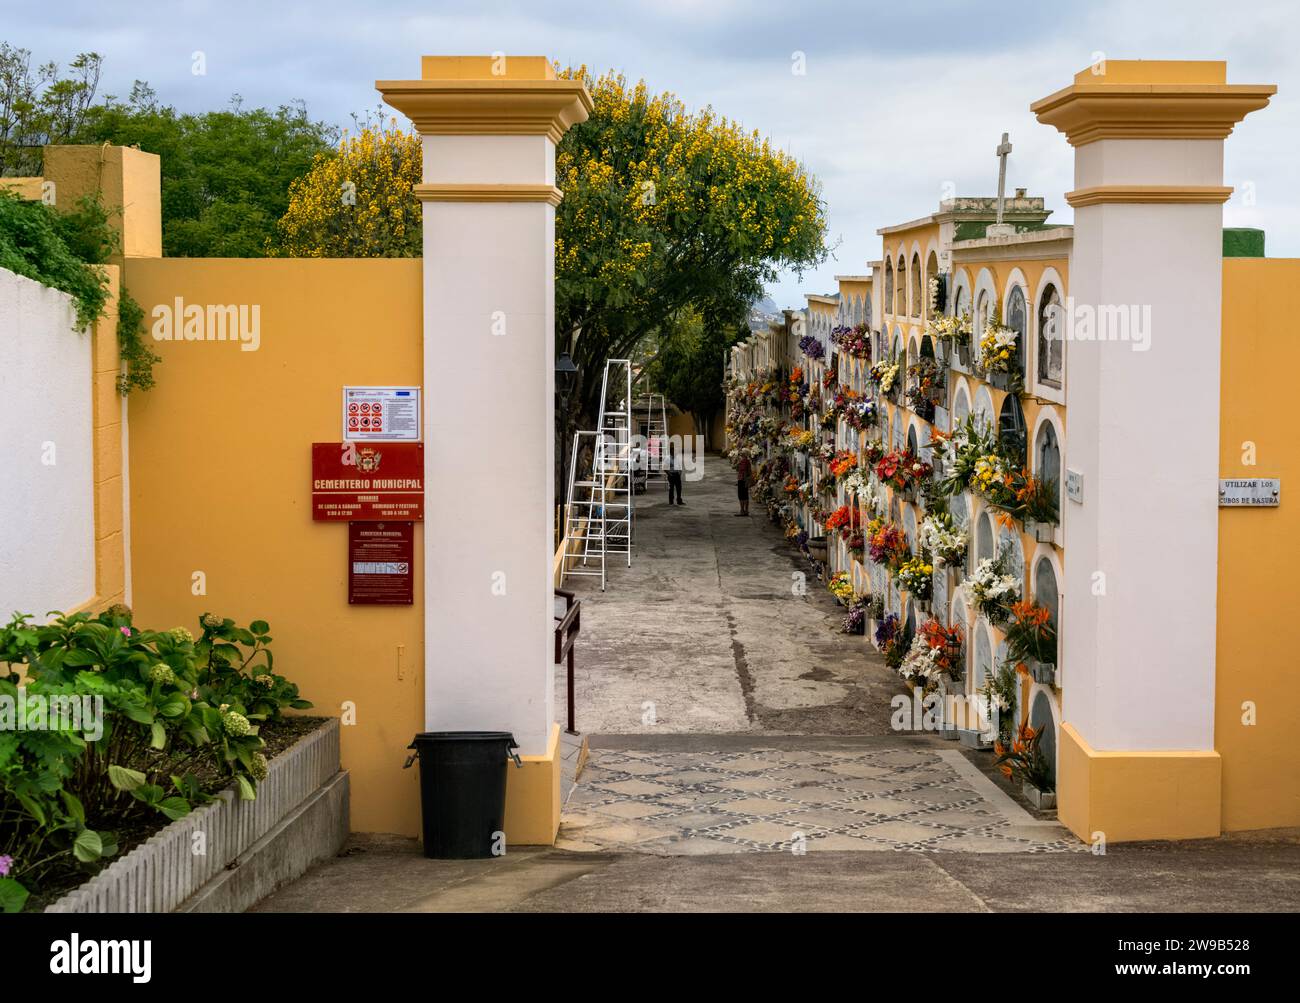 Entrance to Municpal Cemetery, La Orotava, Tenerife showing close up of marble gravestones/memorials to the deceased adorned with fresh flowers. Stock Photo